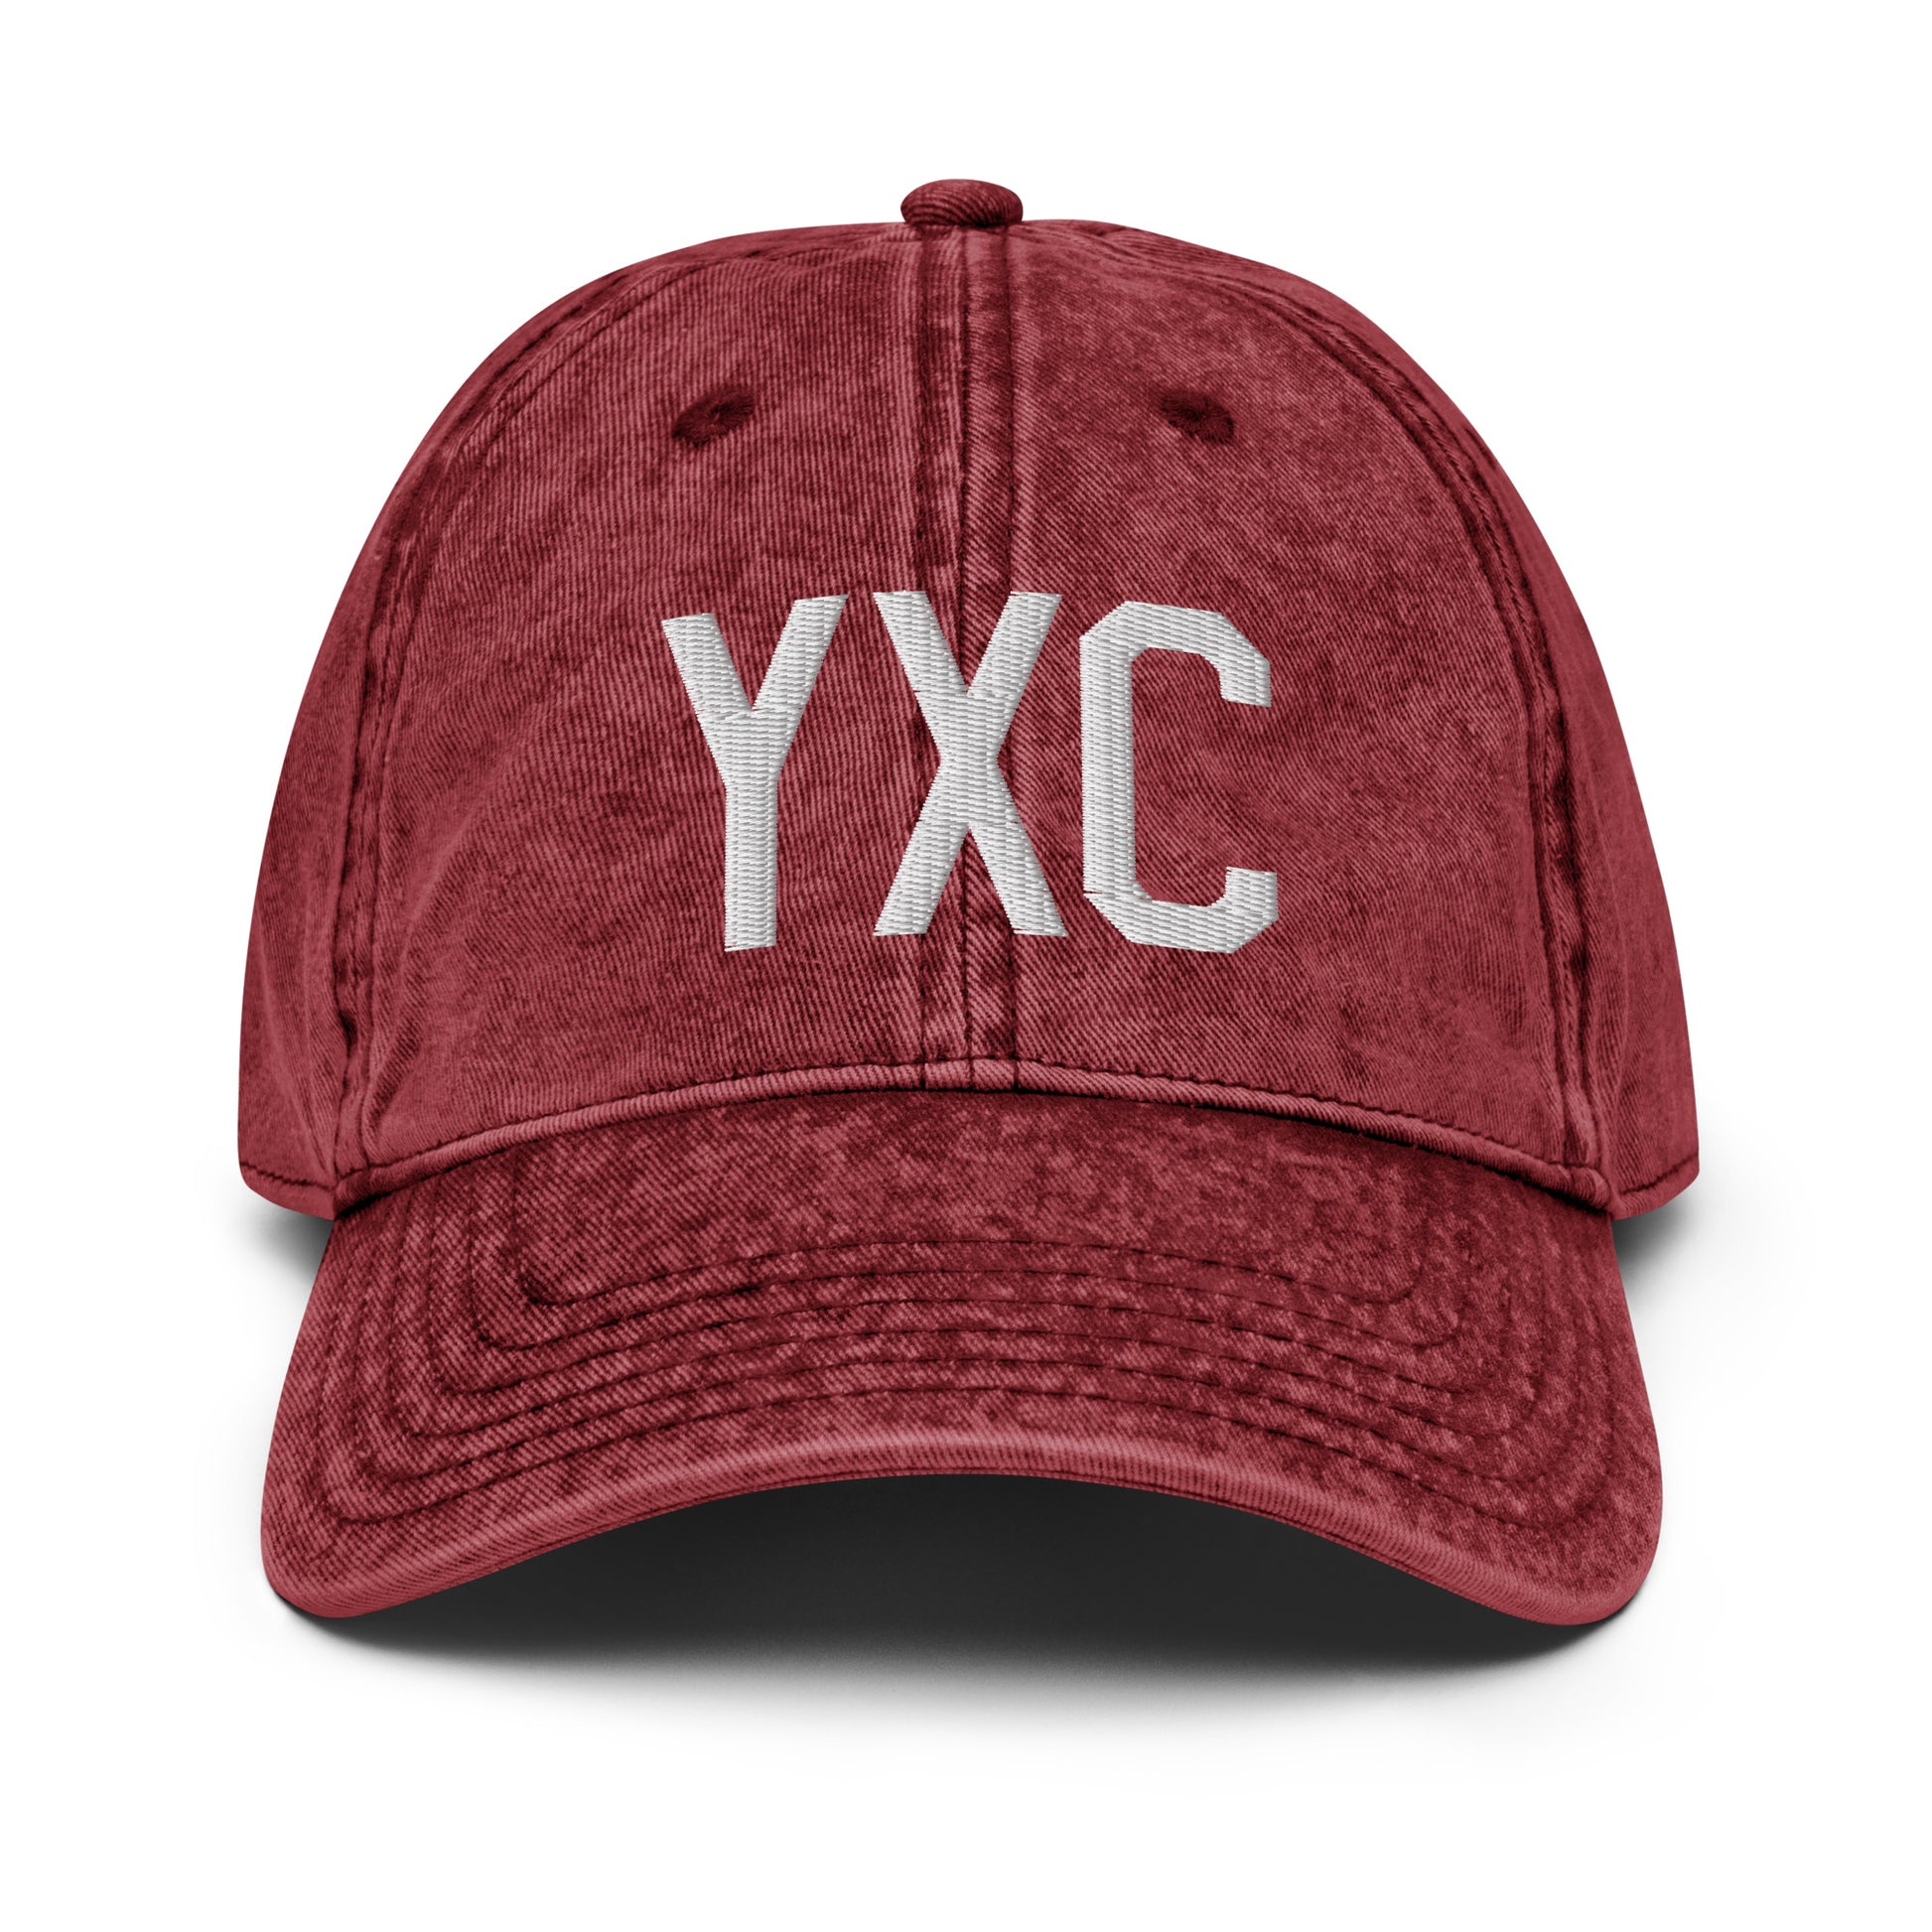 Airport Code Twill Cap - White • YXC Cranbrook • YHM Designs - Image 19